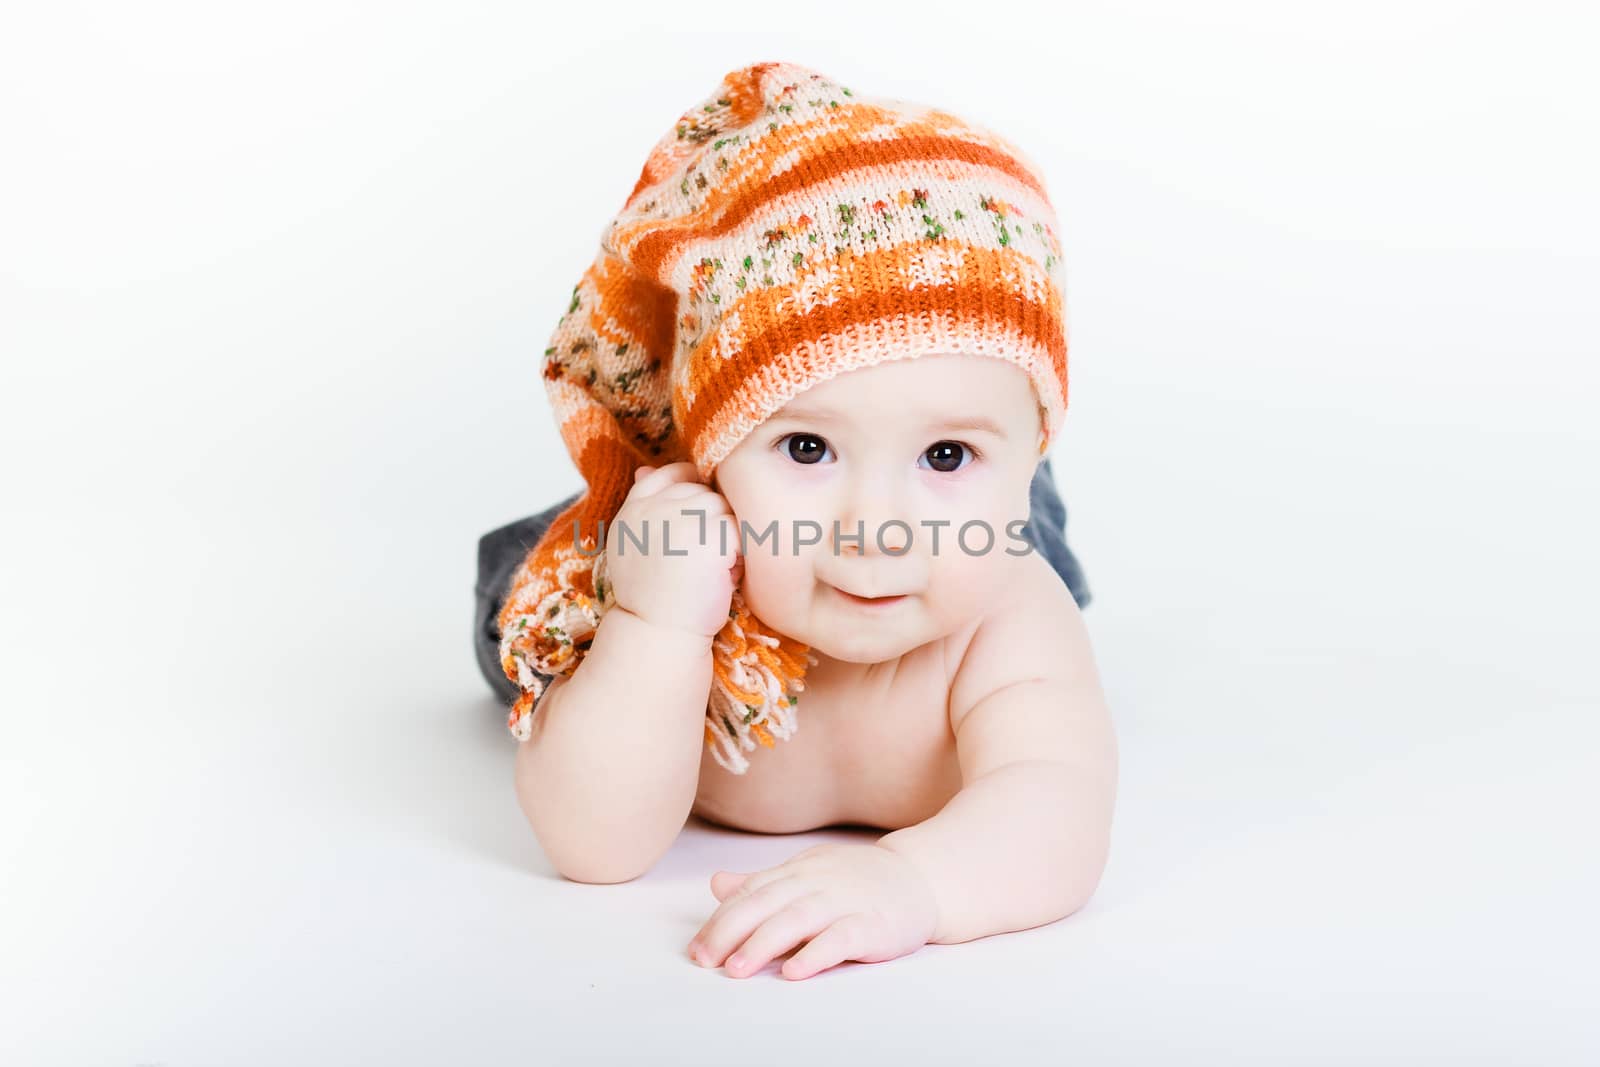 Studio photography. Little baby boy in a knitted hat posing